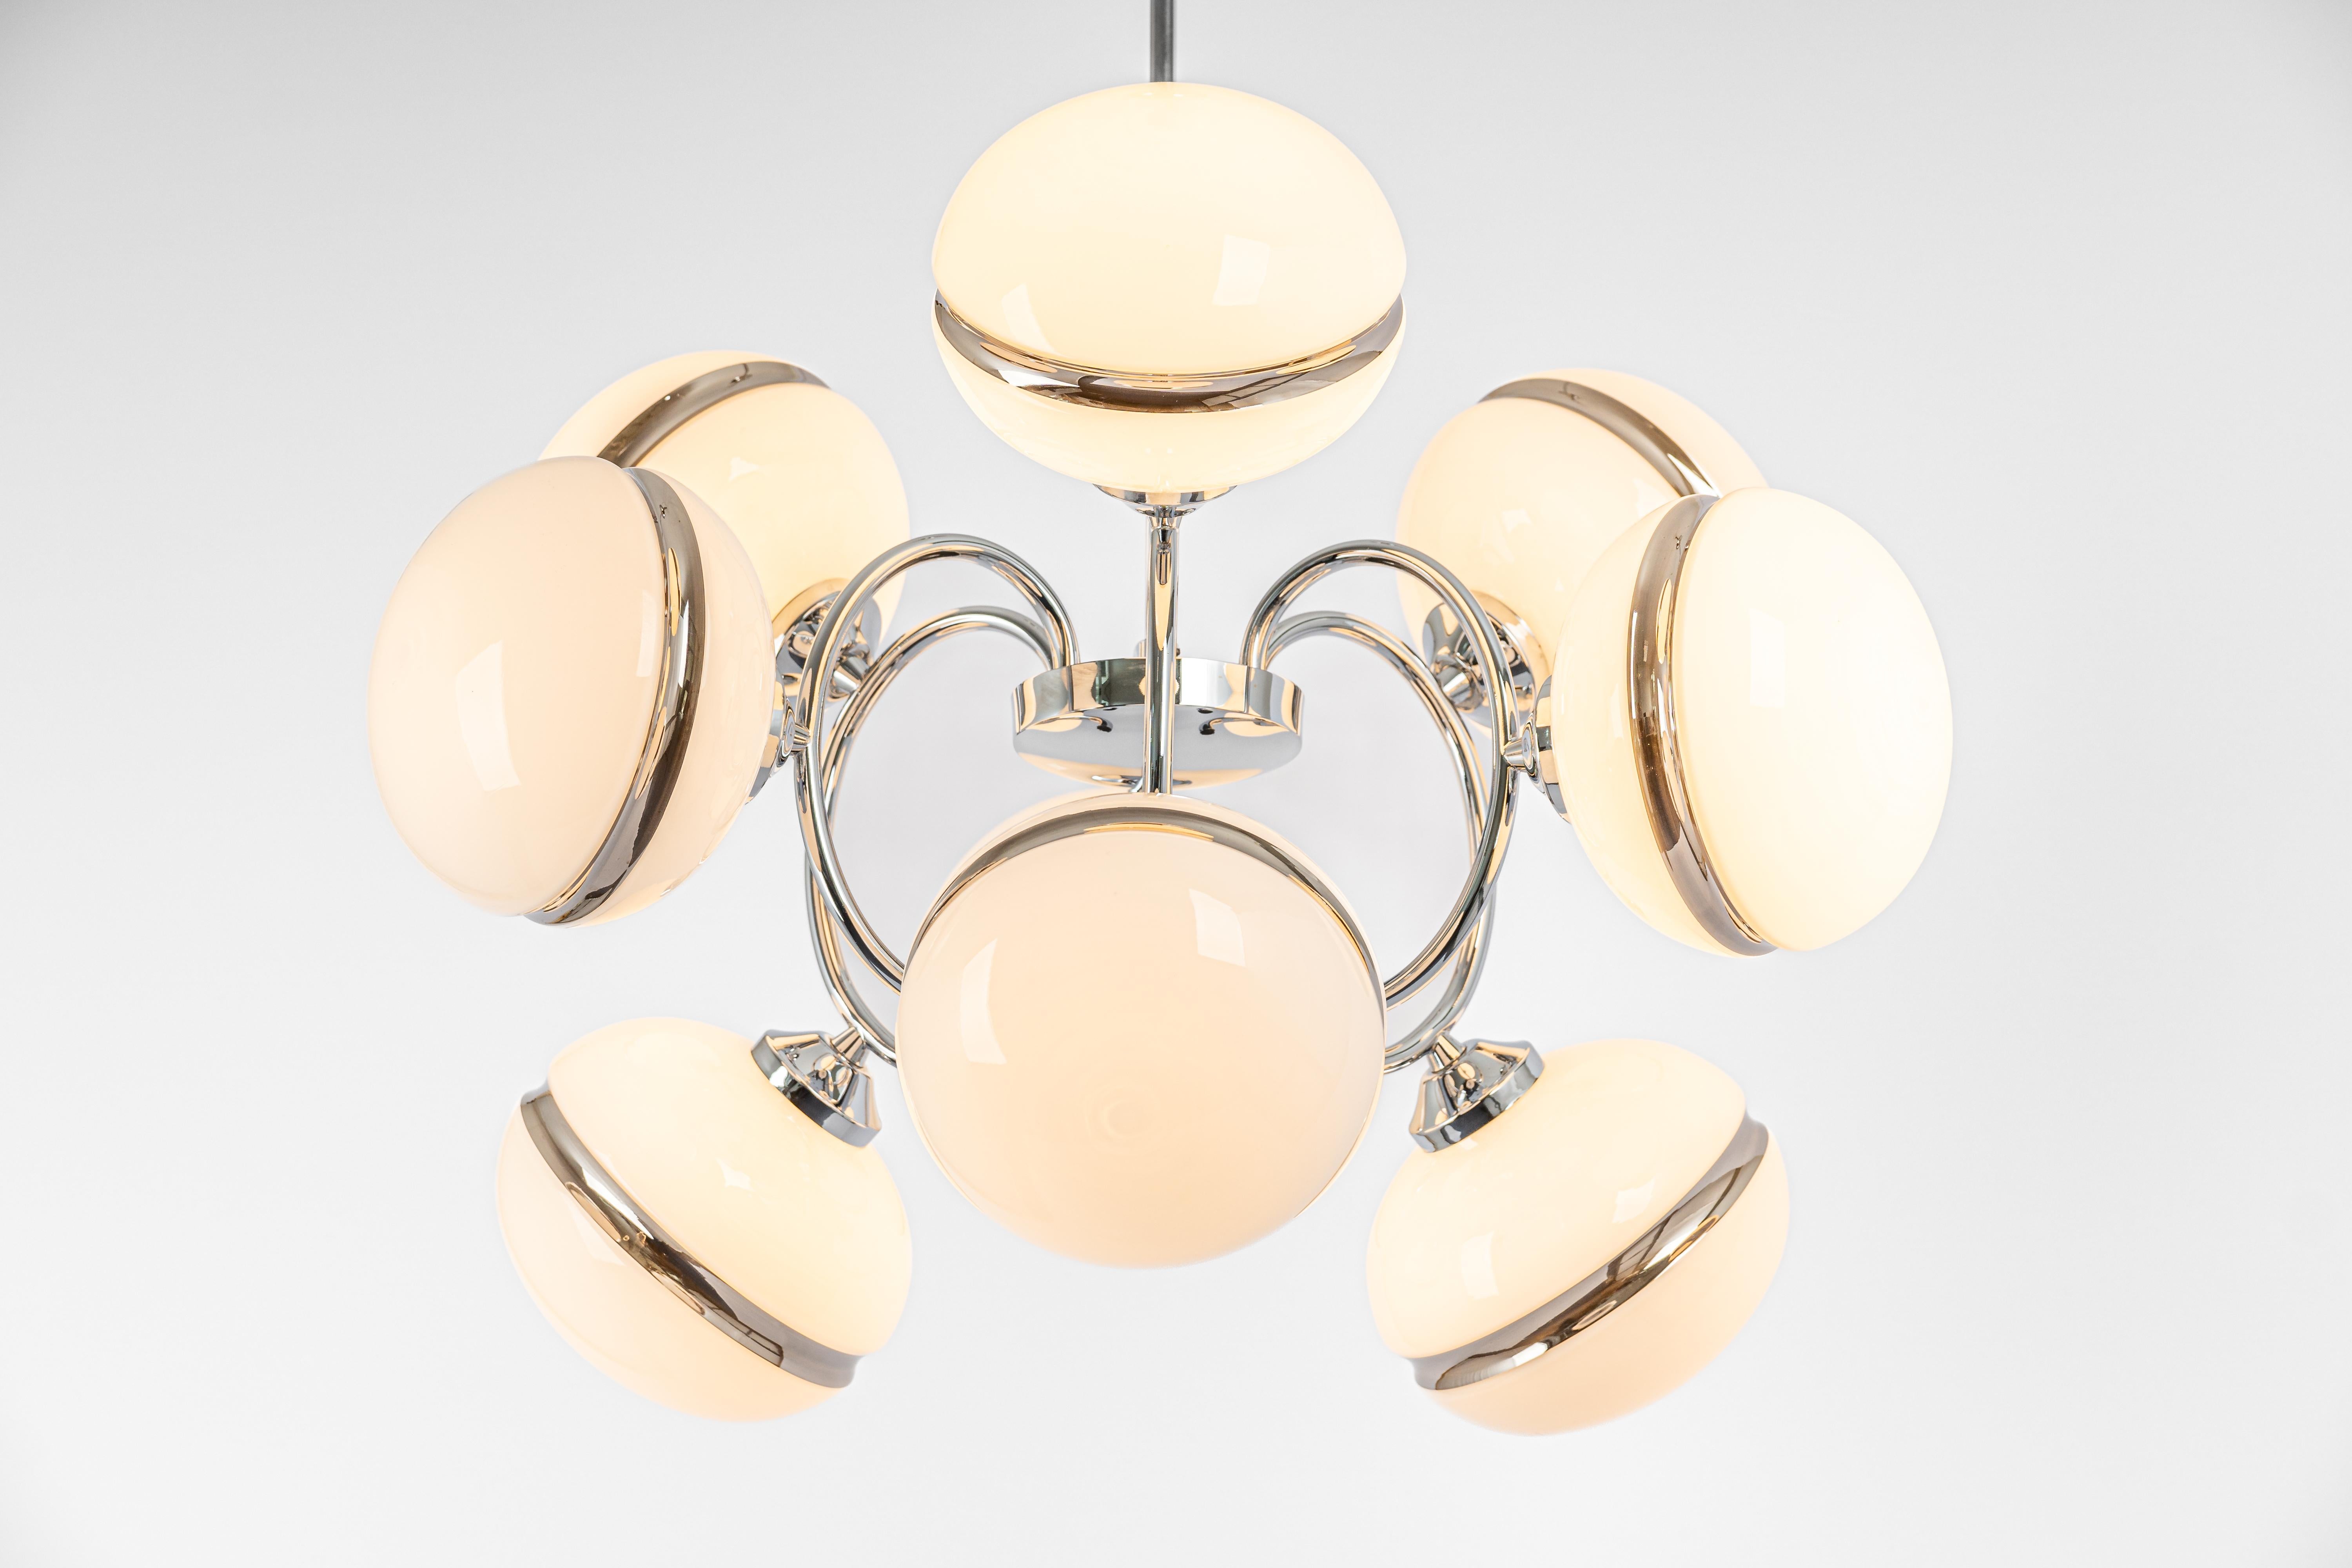 Stunning  Sputnik chandelier with 9 glass shades by Richard Essig, Germany, 1960s

It needs 9 candelabra size bulbs up to 40 watts each. Light bulbs are not included. It is possible to install this fixture in all countries (US, UK, Europe, Asia,